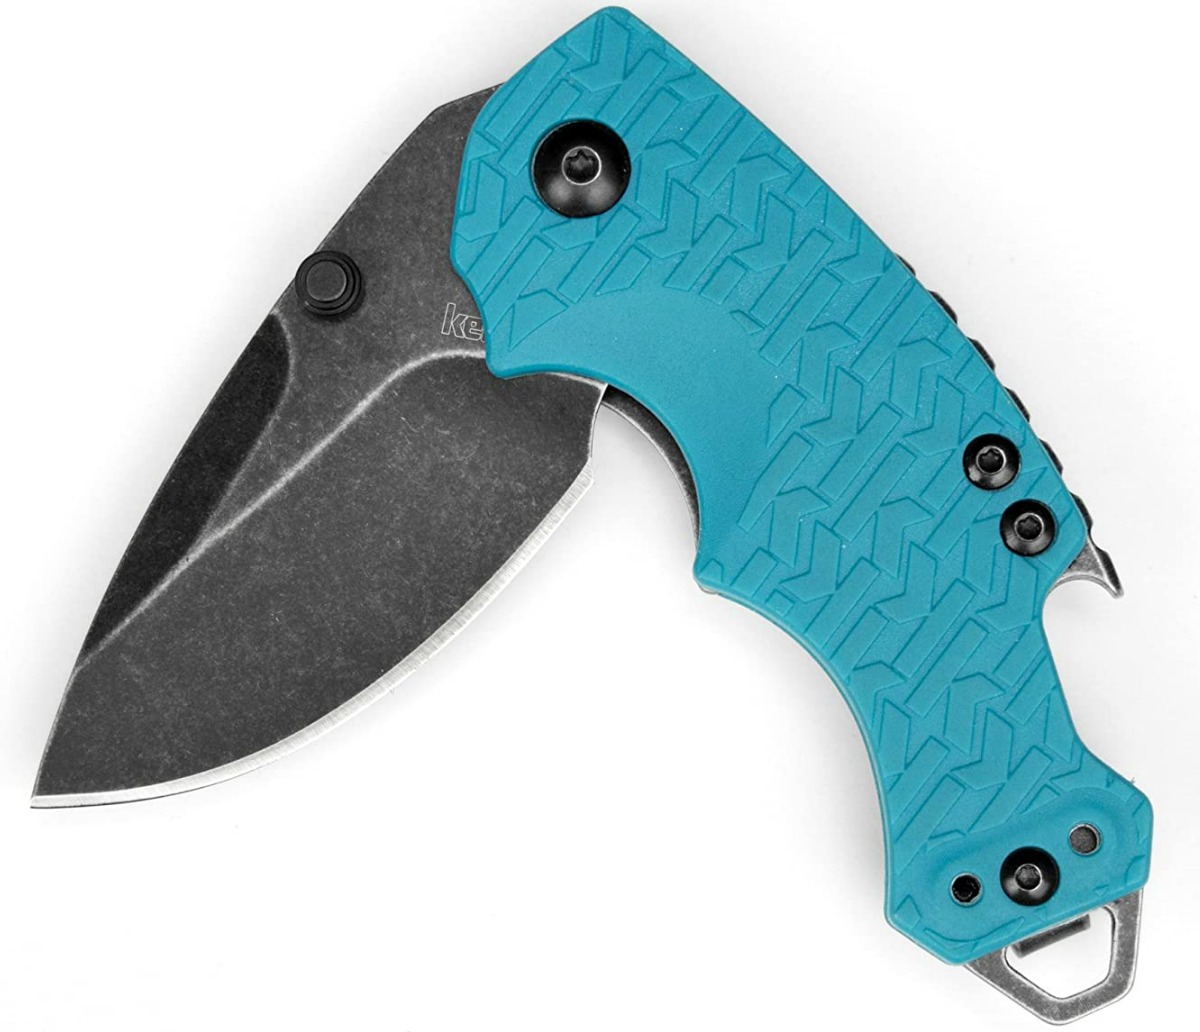 Teal colored pocket knife partially open